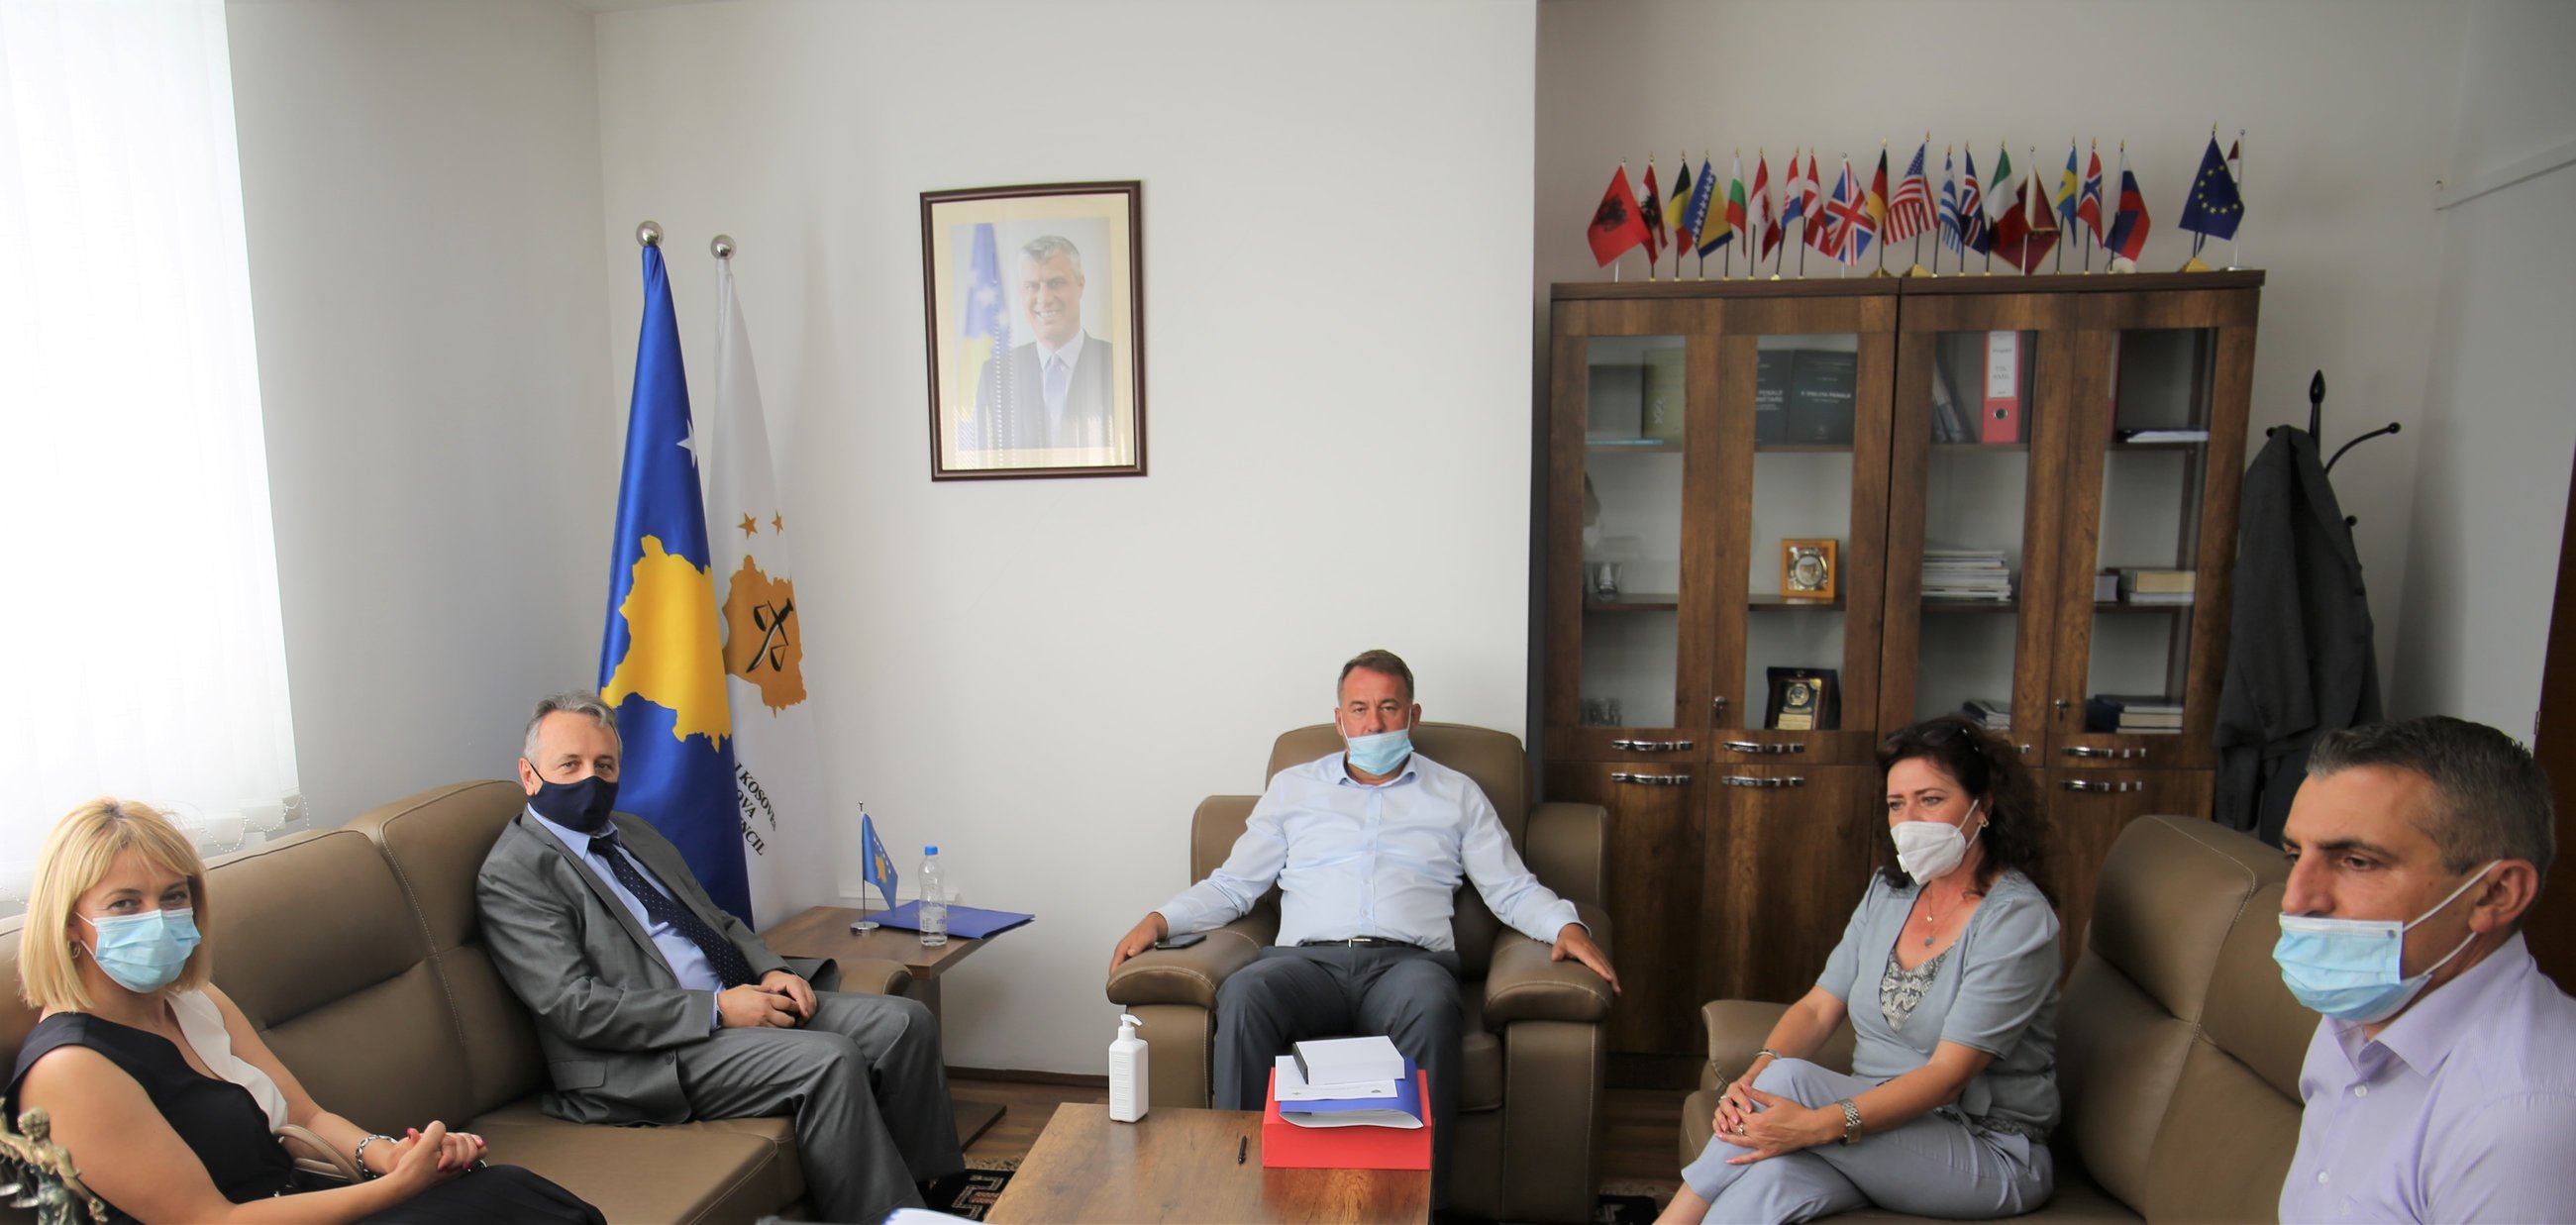 Chairman received in a meeting the newest member of the KPC from the ranks of law faculties